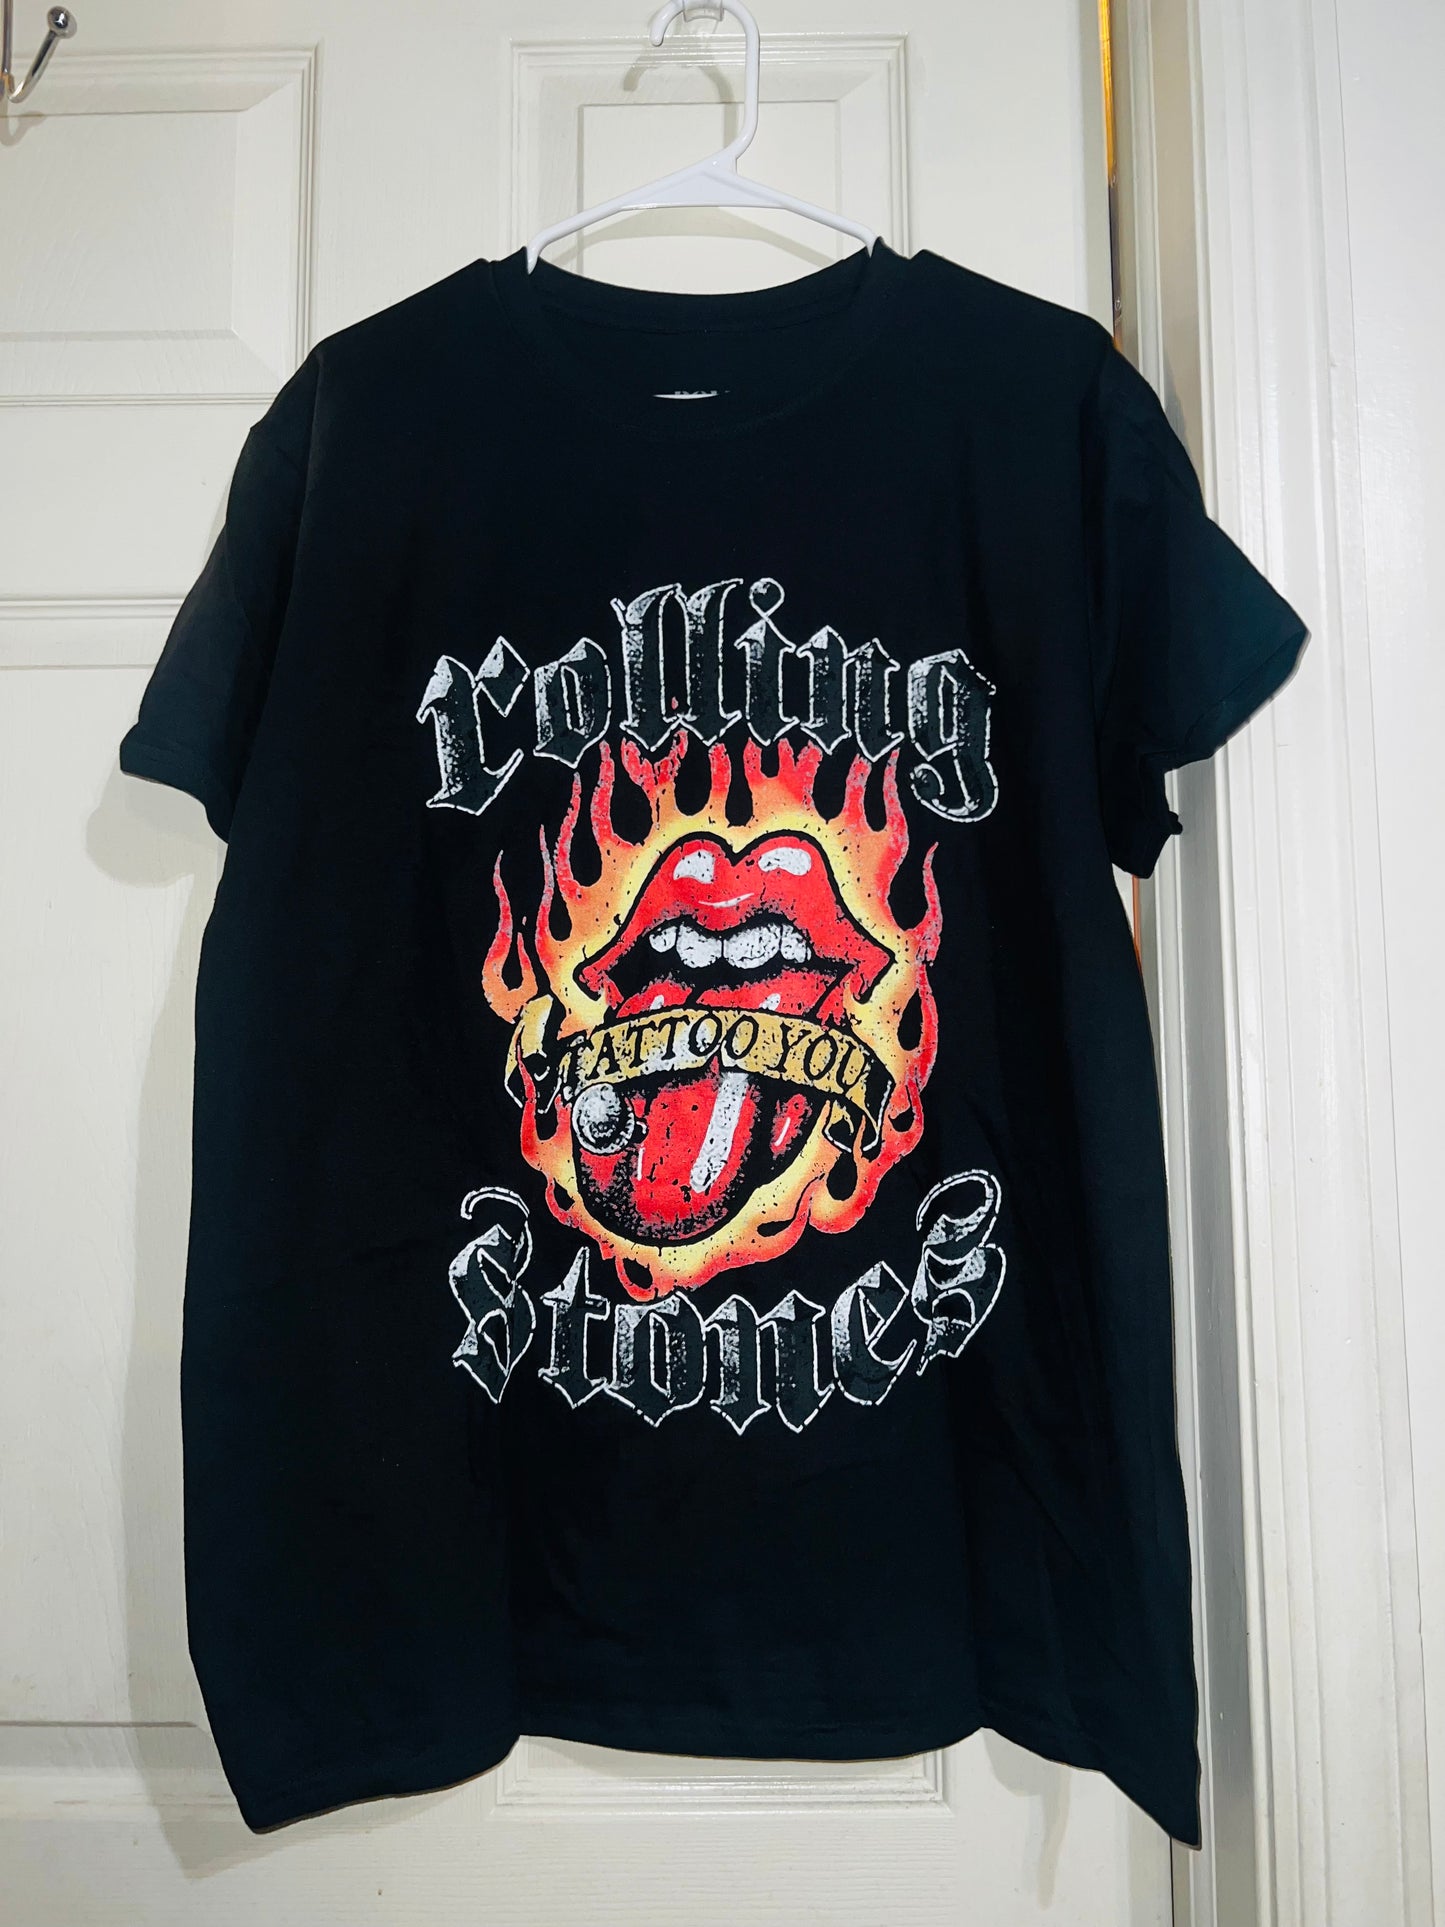 Rolling Stones “Tattoo You” Oversized Distressed Tee